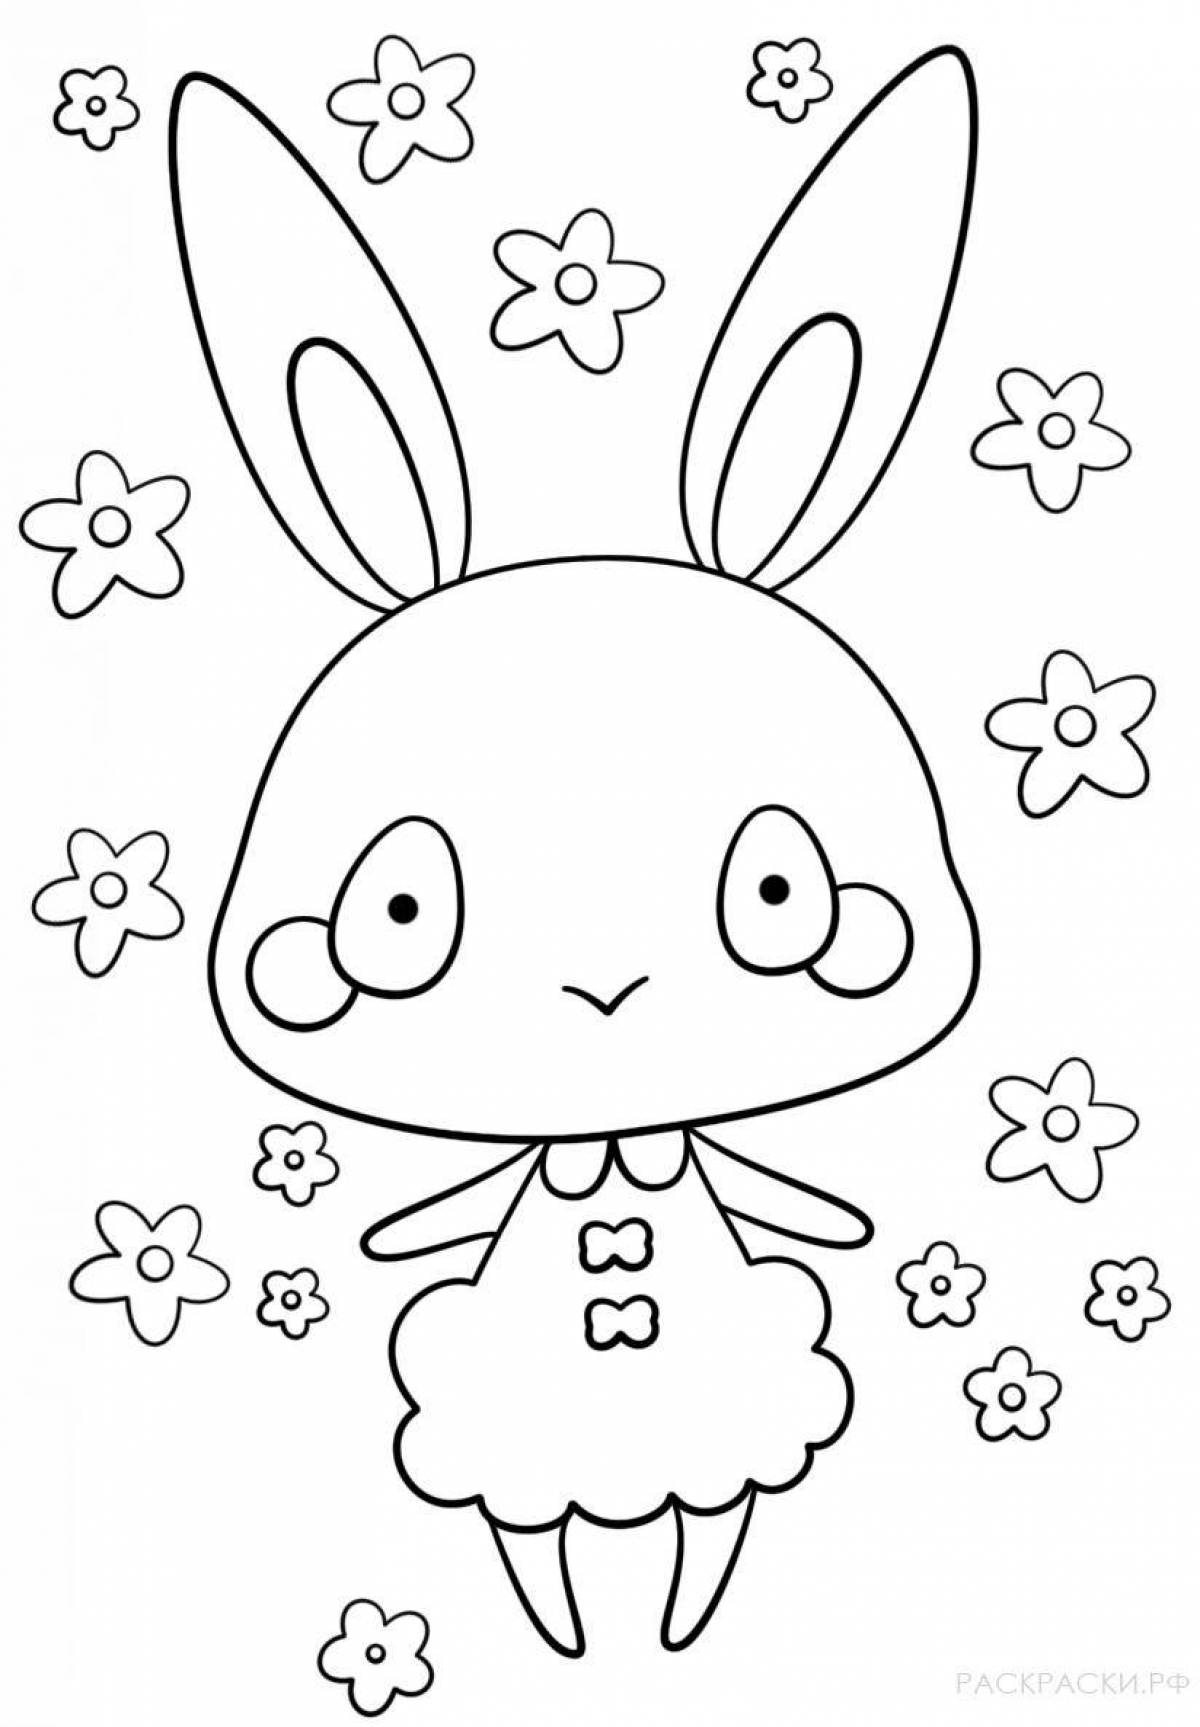 Colourful anime bunny coloring book